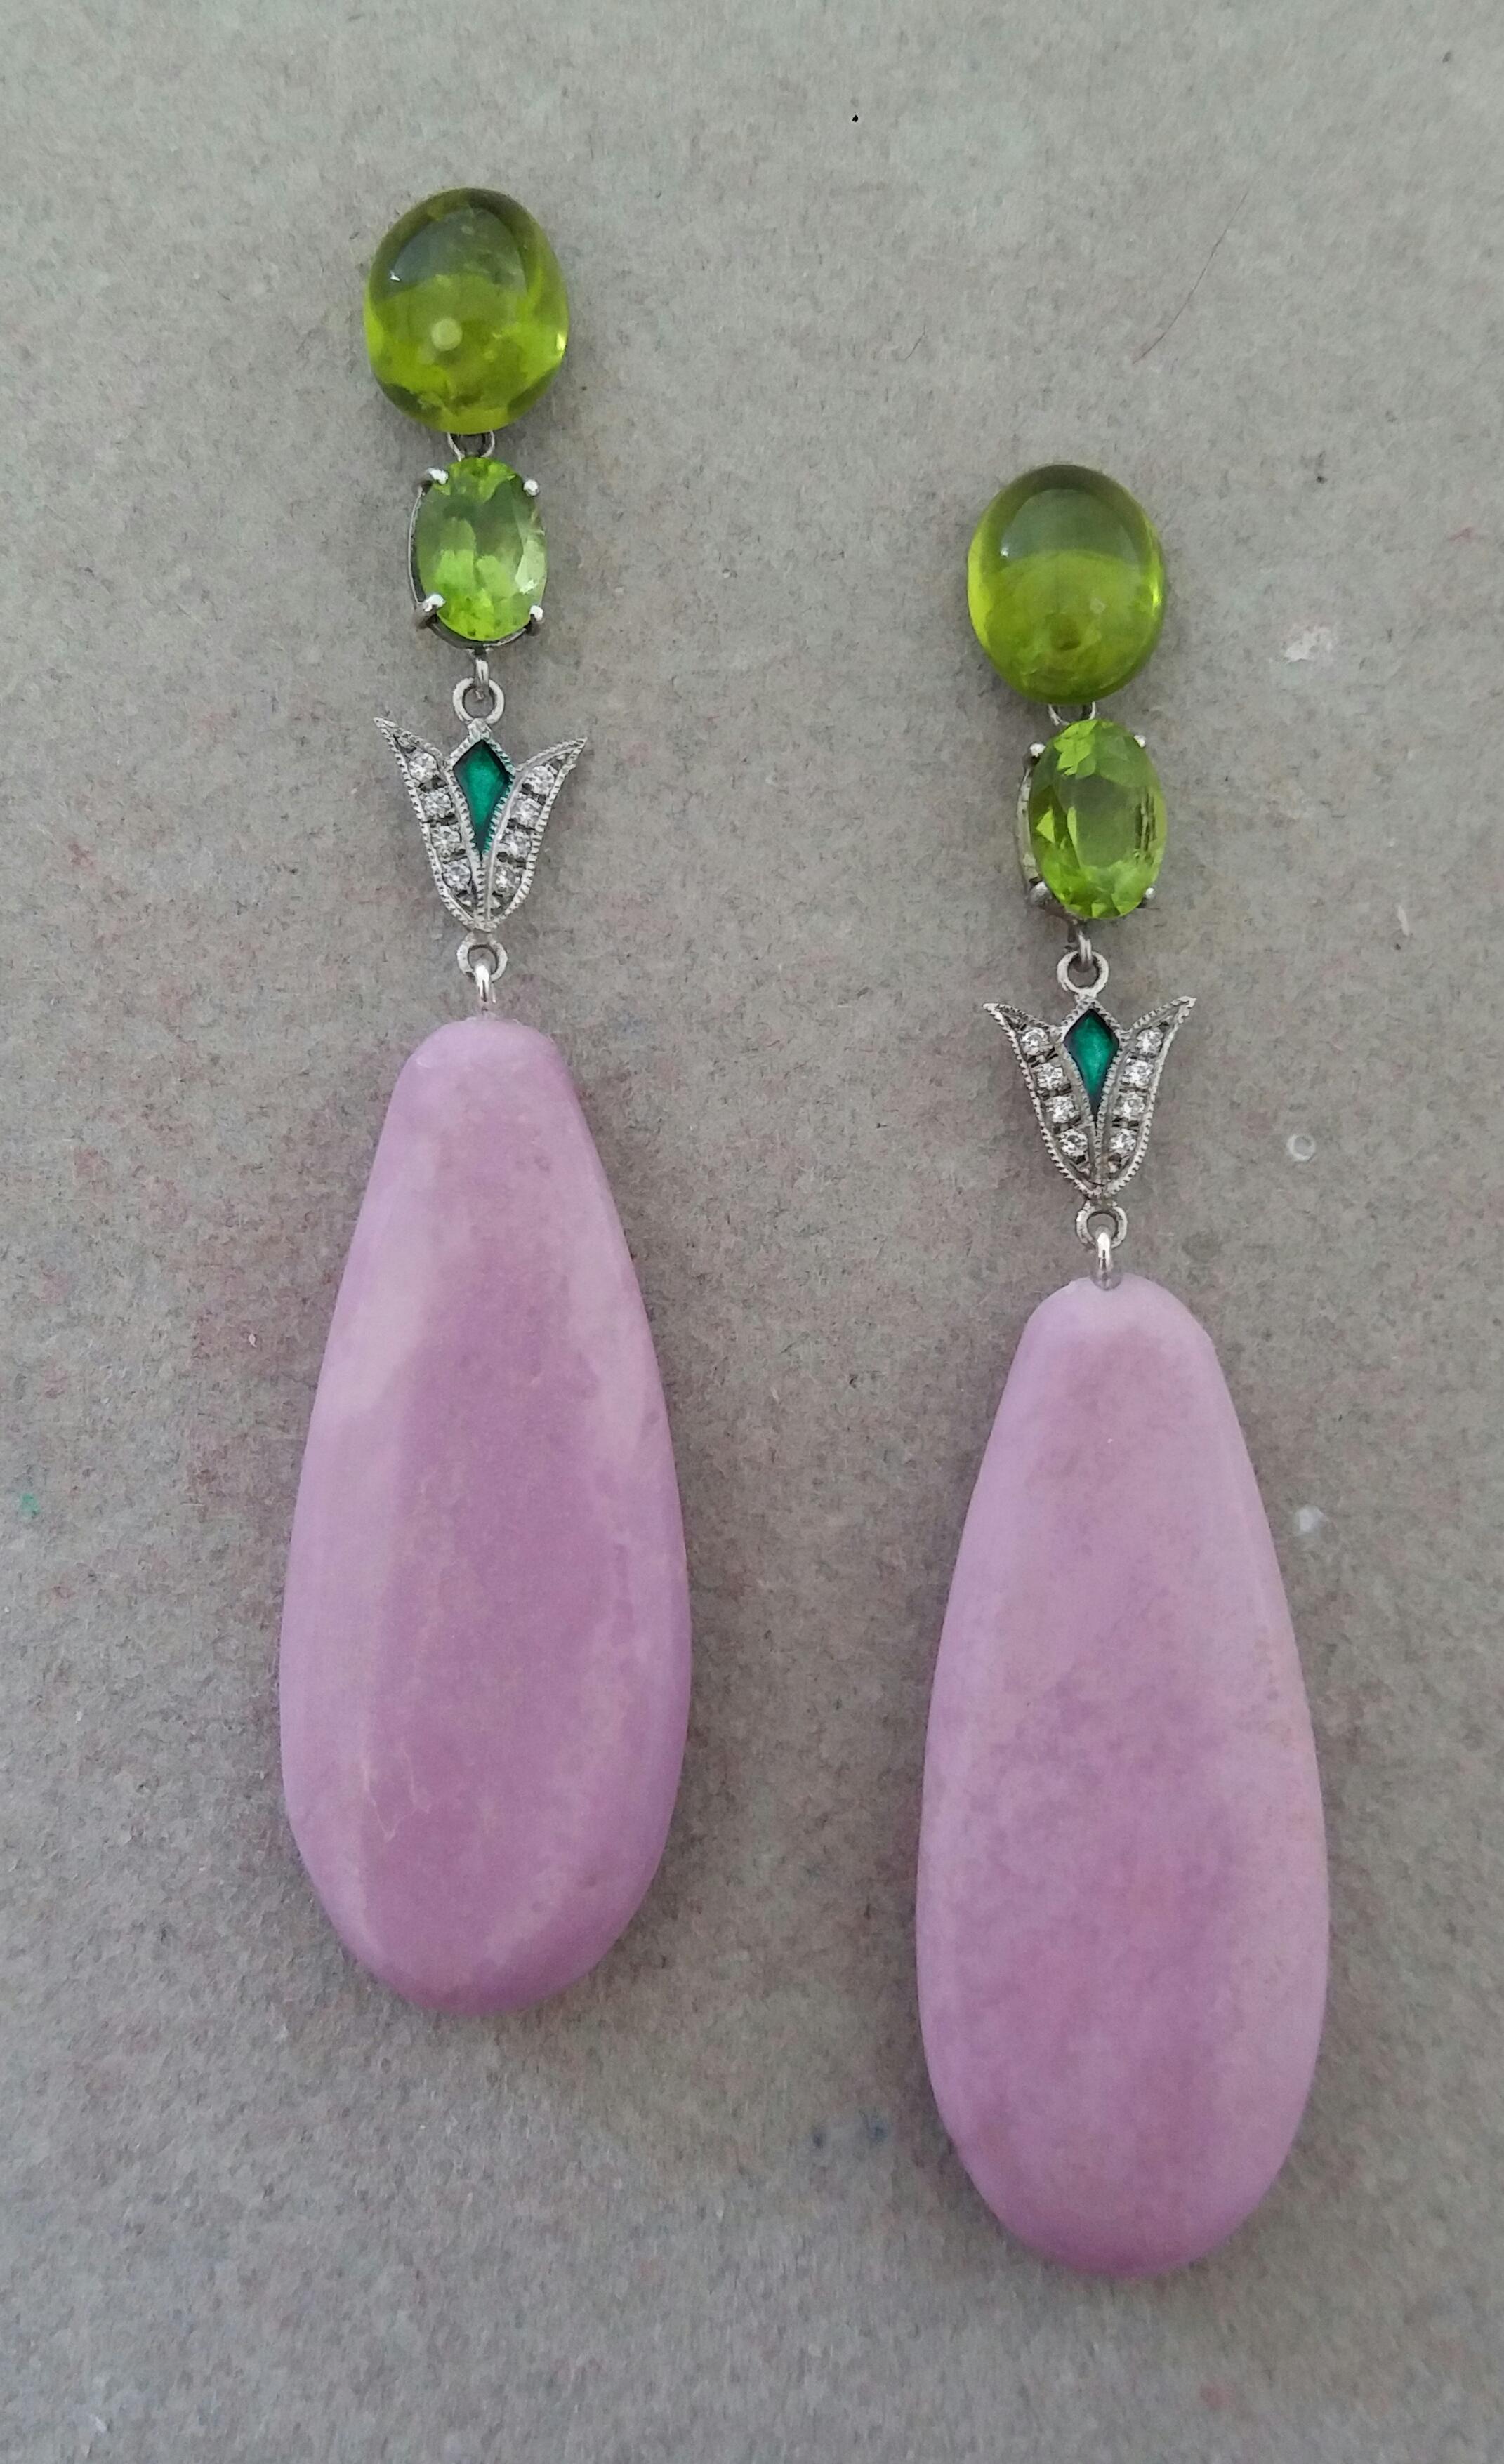 A pair of Art Deco style earrings, the upper part with 2 oval Peridot cabochons 8 mm x 10 mm that support 2 oval faceted Peridot 6mmx8mm and 2 elements in white gold, diamonds and green enamel, while the lower parts are composed of 2 Phosphosiderite